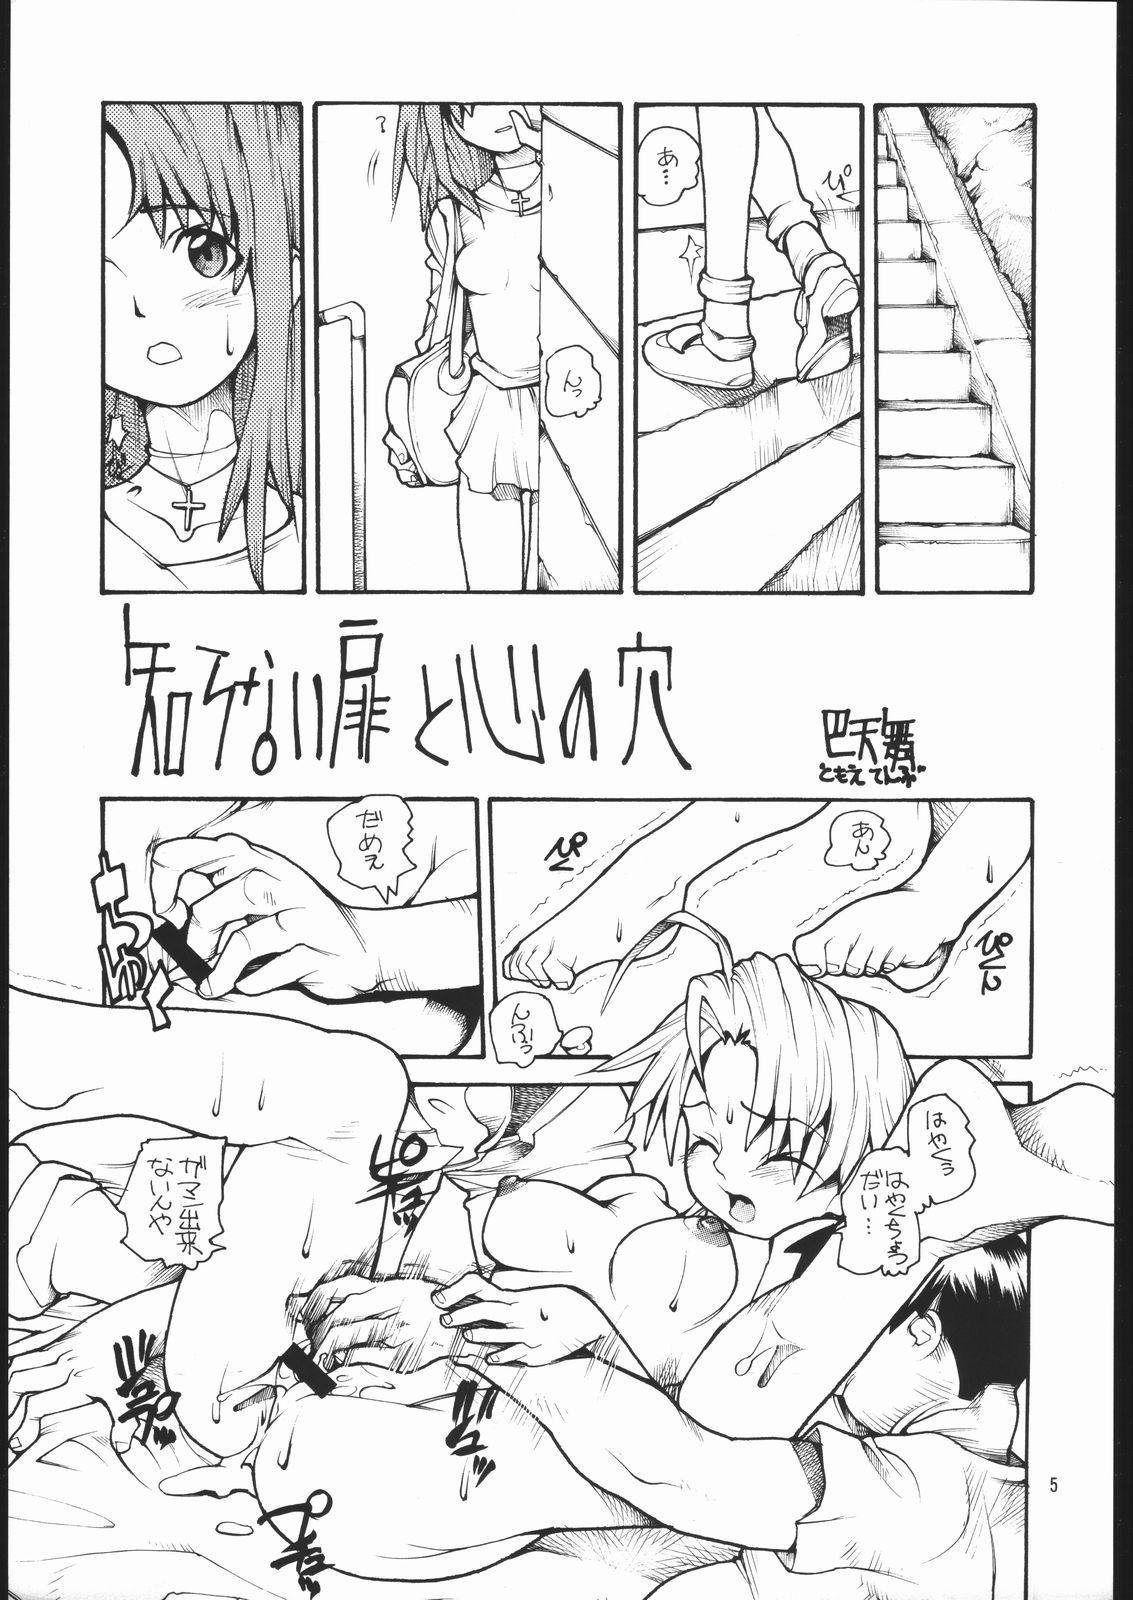 Scissoring HR6 | Hyper Resturant 6 - Love hina Gay Hairy - Page 4